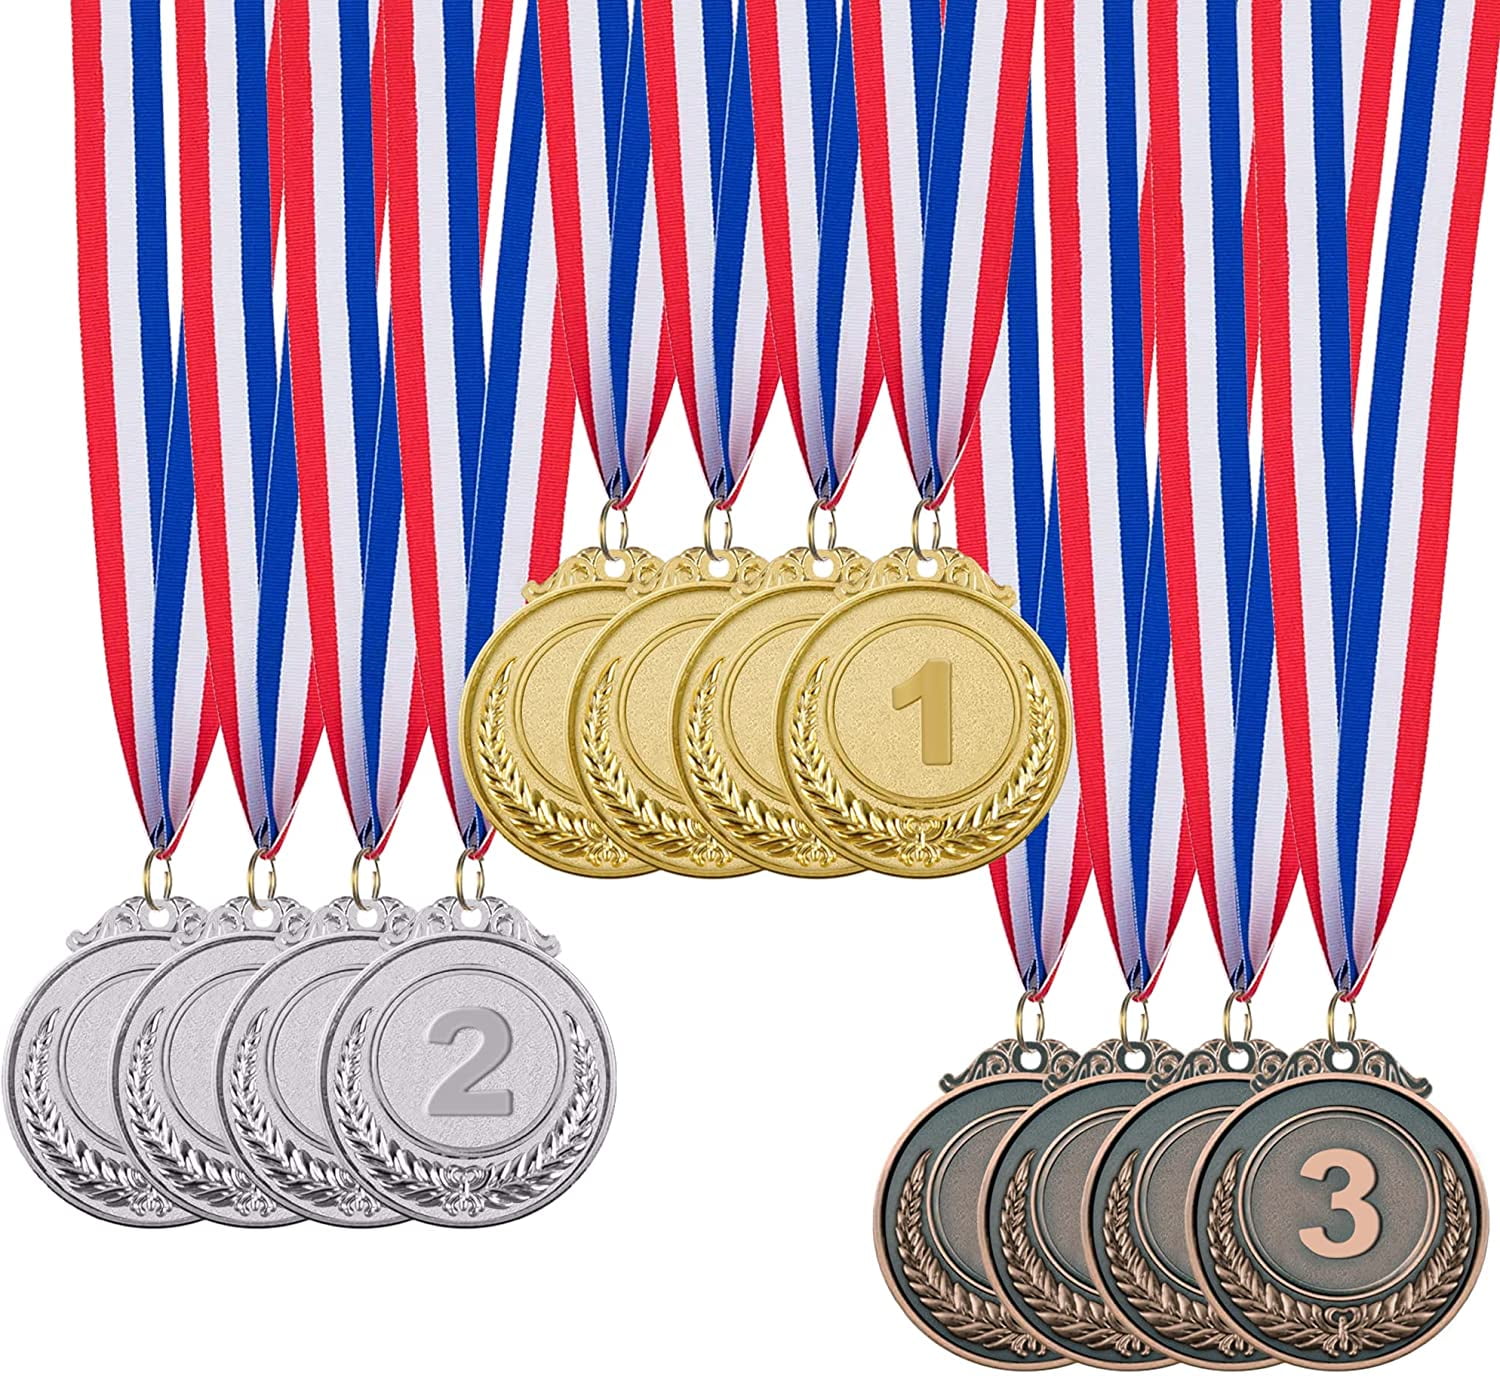 Express Medals Various 10 Pack Styles of Auto Racing Flag Award Medals with Neck Ribbons Trophy Award Prize Gift 